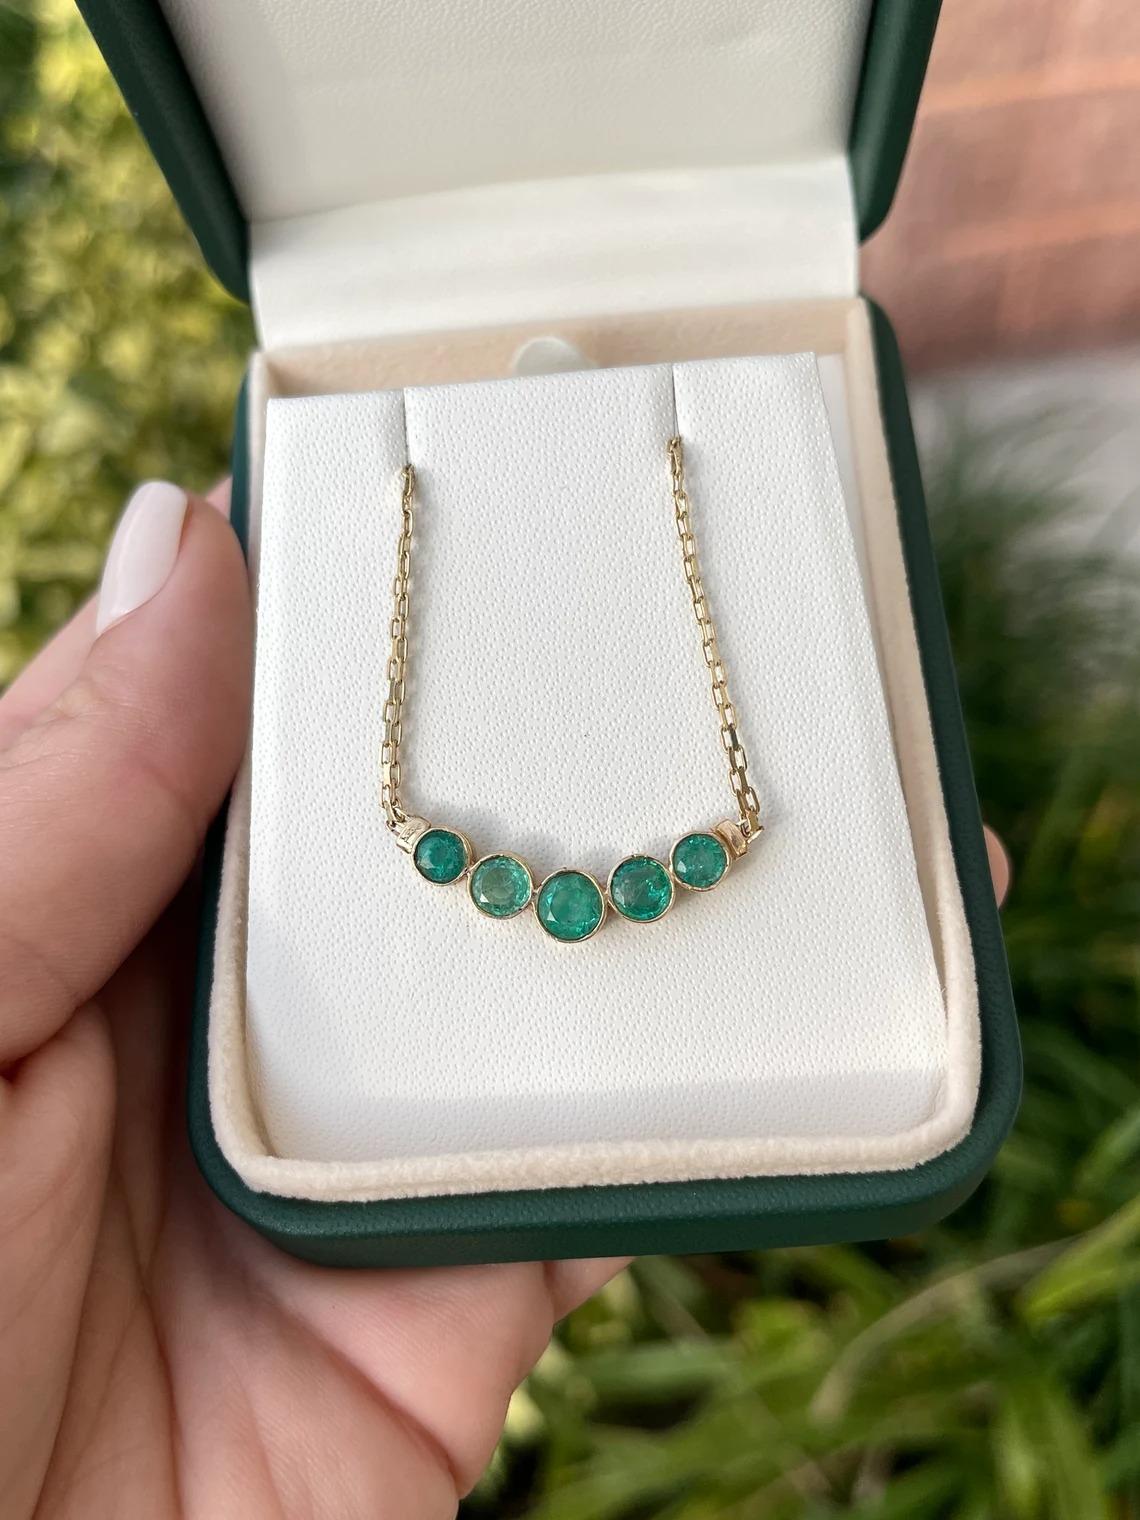 A five-stone emerald everyday necklace. Handcrafted in solid 14k yellow gold, the piece showcases natural emeralds individually bezel set. Each stone is completely natural and genuine. The chain measures 17 inches long and lays perfectly around the